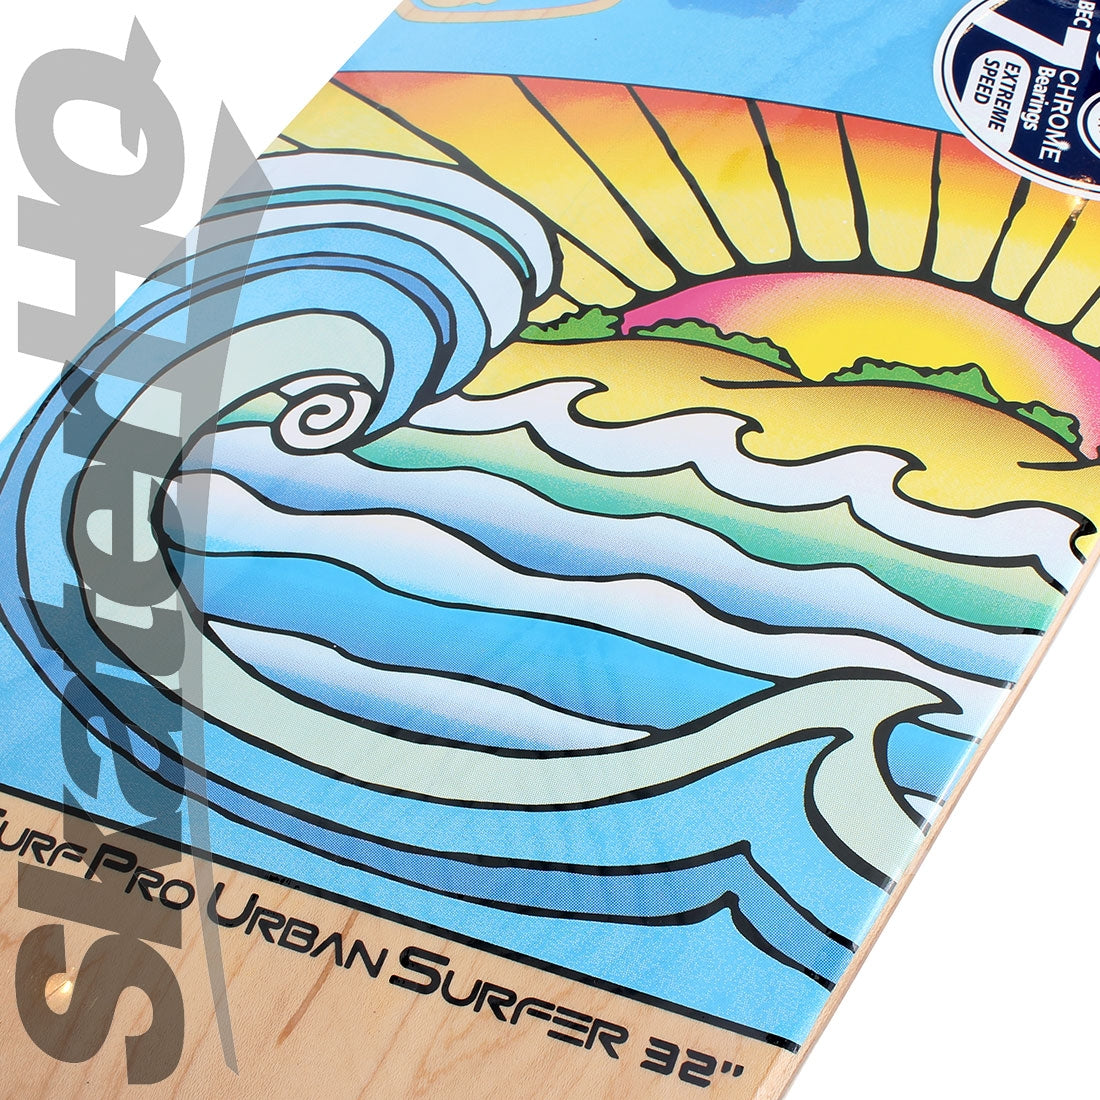 Surf Pro 32 Urban Surfer Skateboard Compl Carving and Specialty